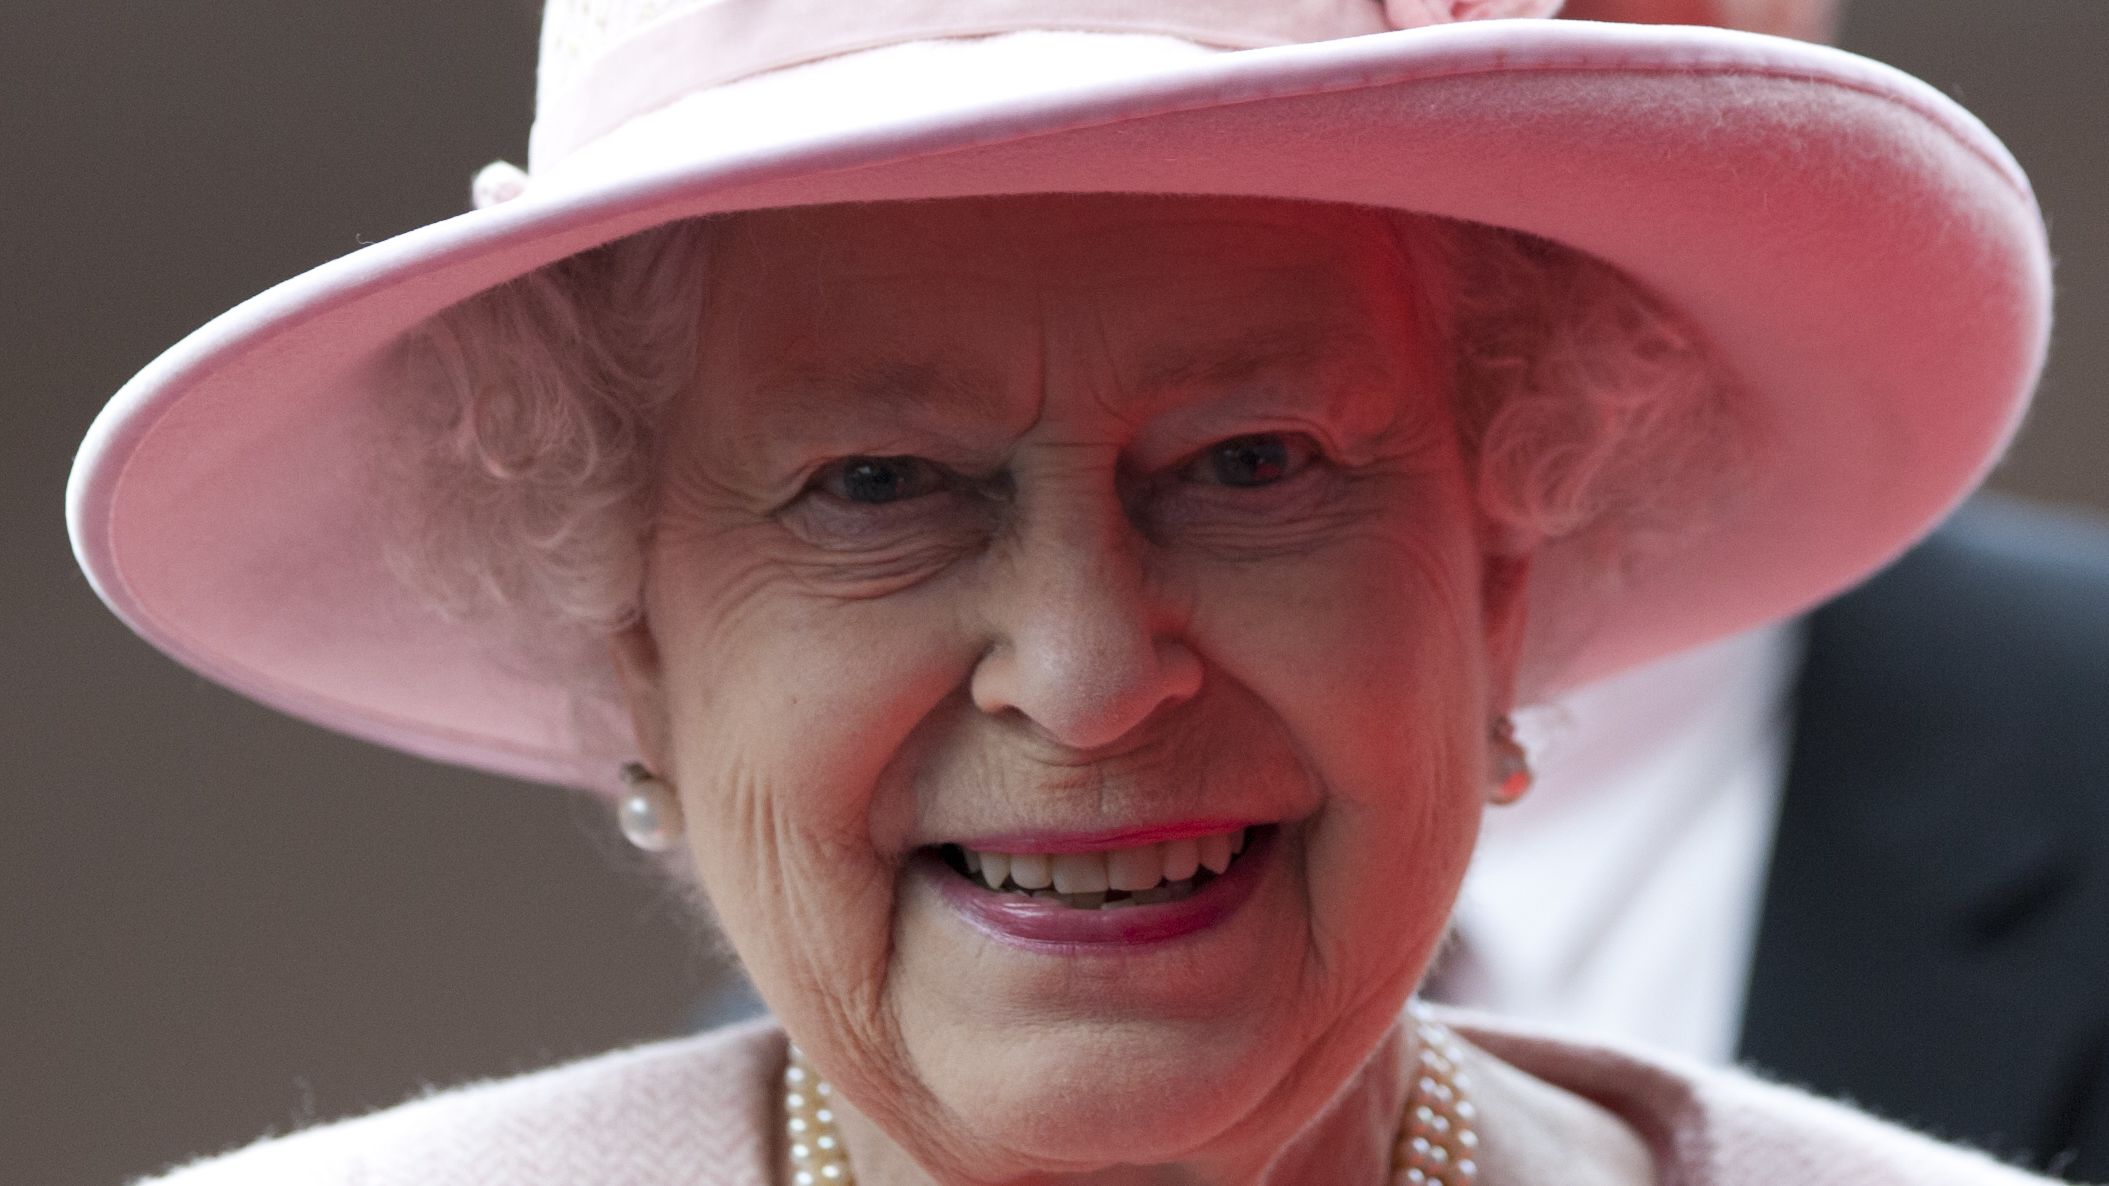 Queen Elizabeth II smiles during her visit to the Manchester Central convention centre on March 23, 2012.